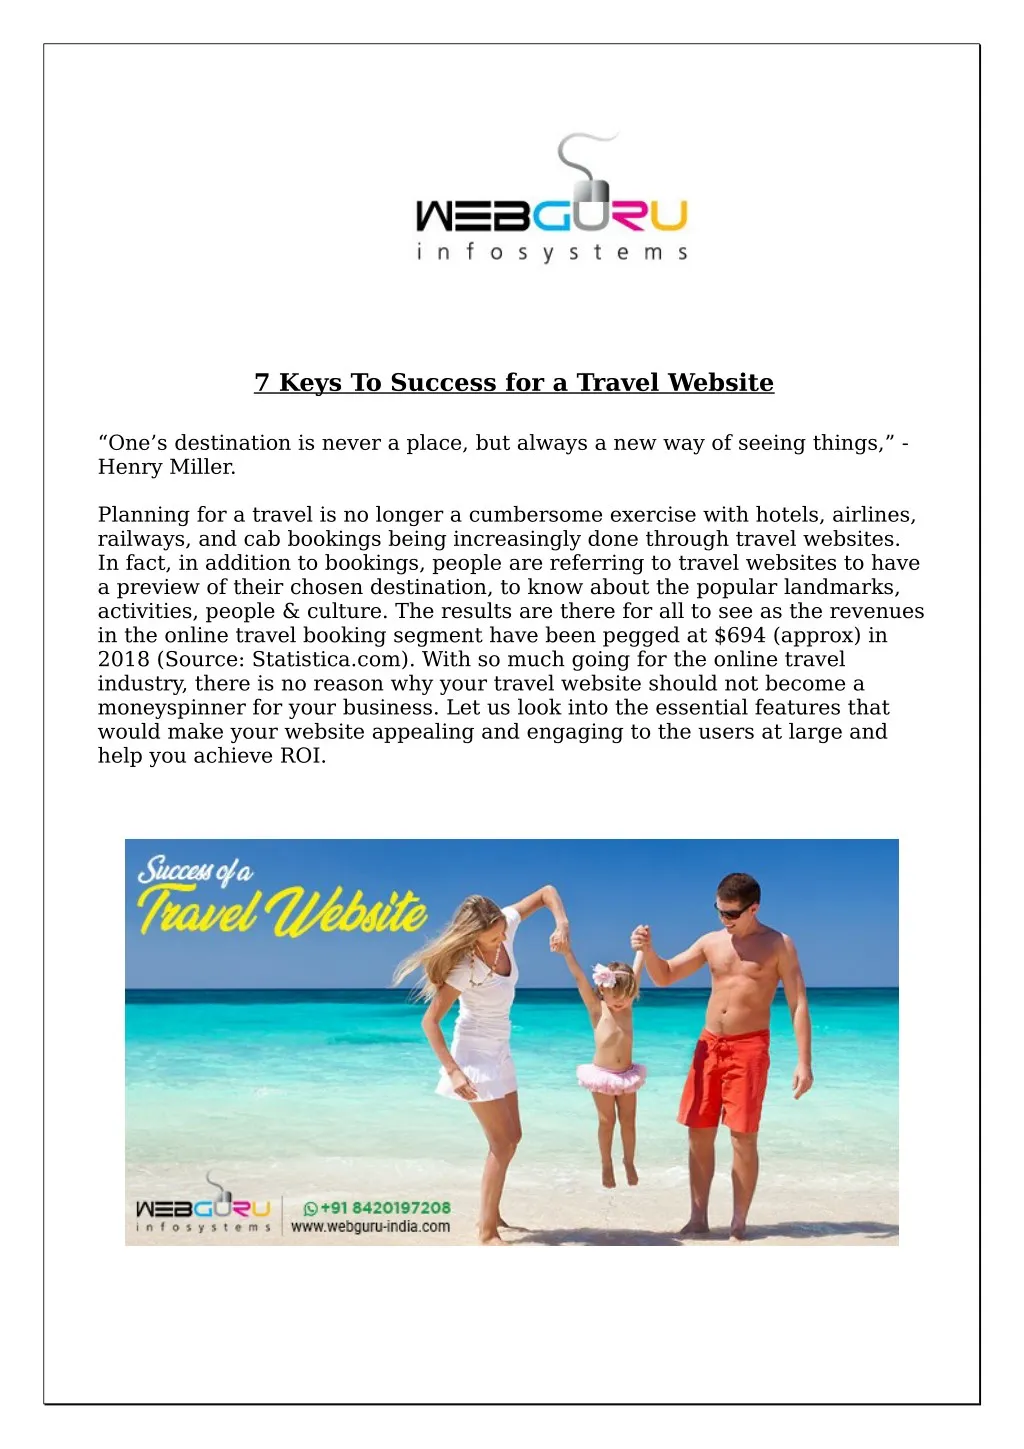 7 keys to success for a travel website